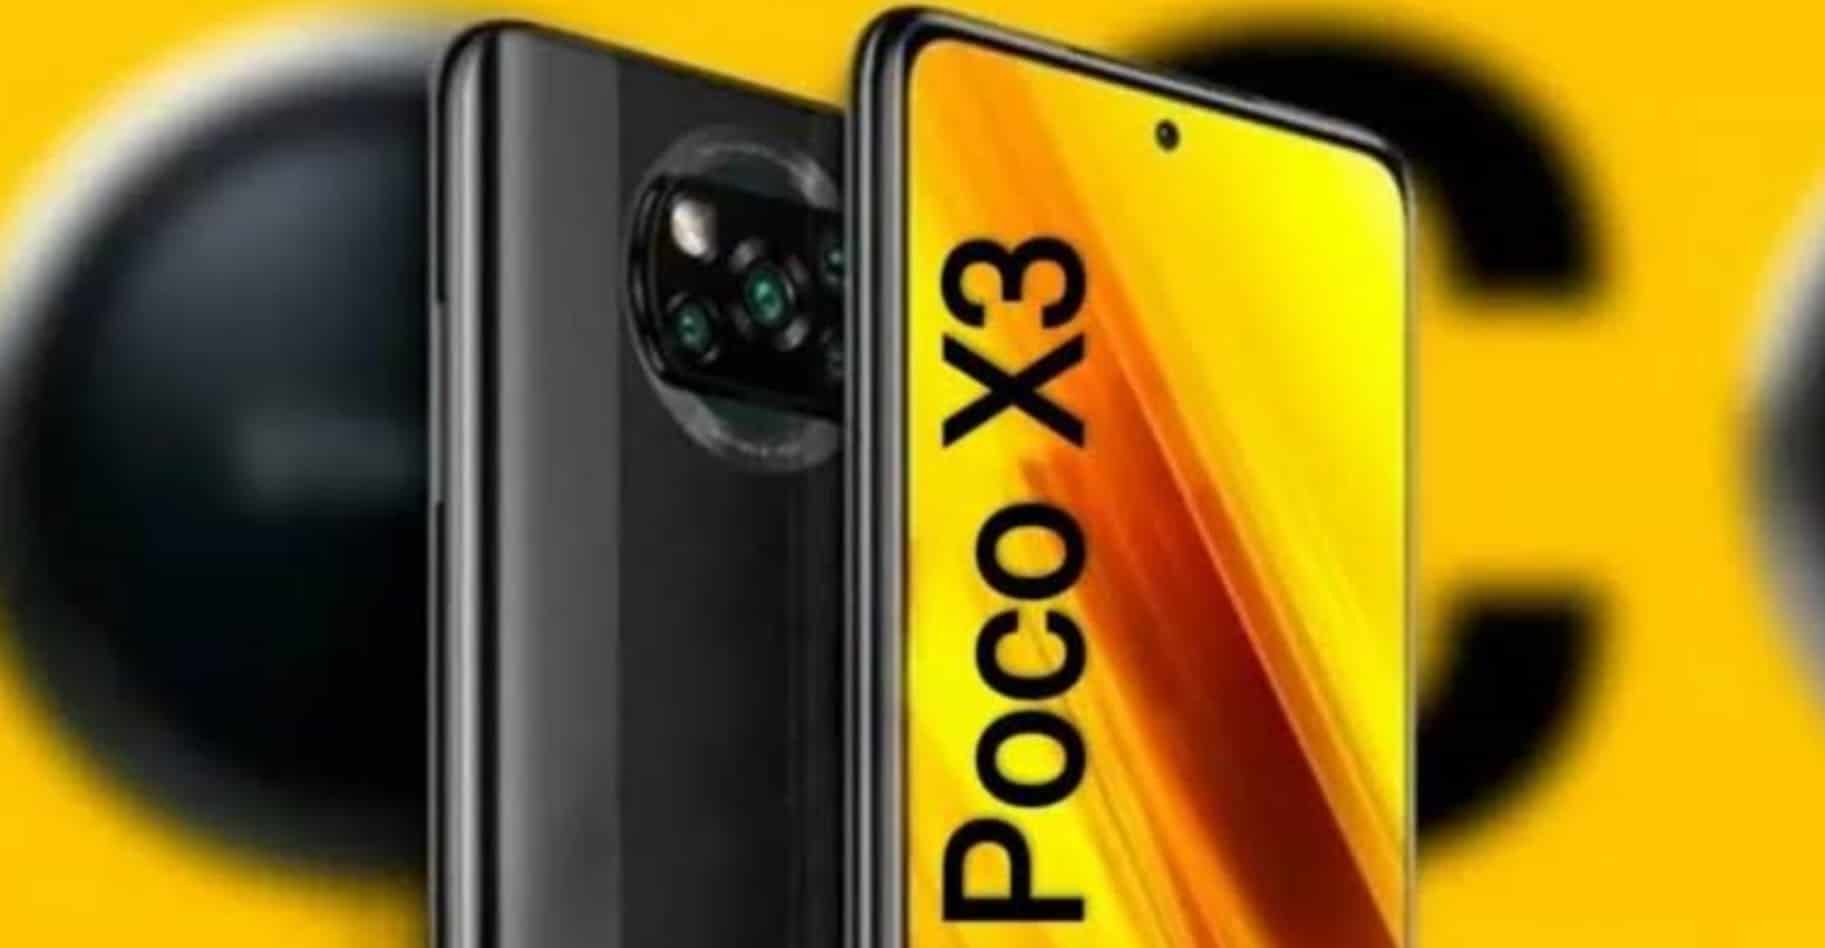 POCO X3 Pro Key Specifications Tipped Ahead of Global Launch